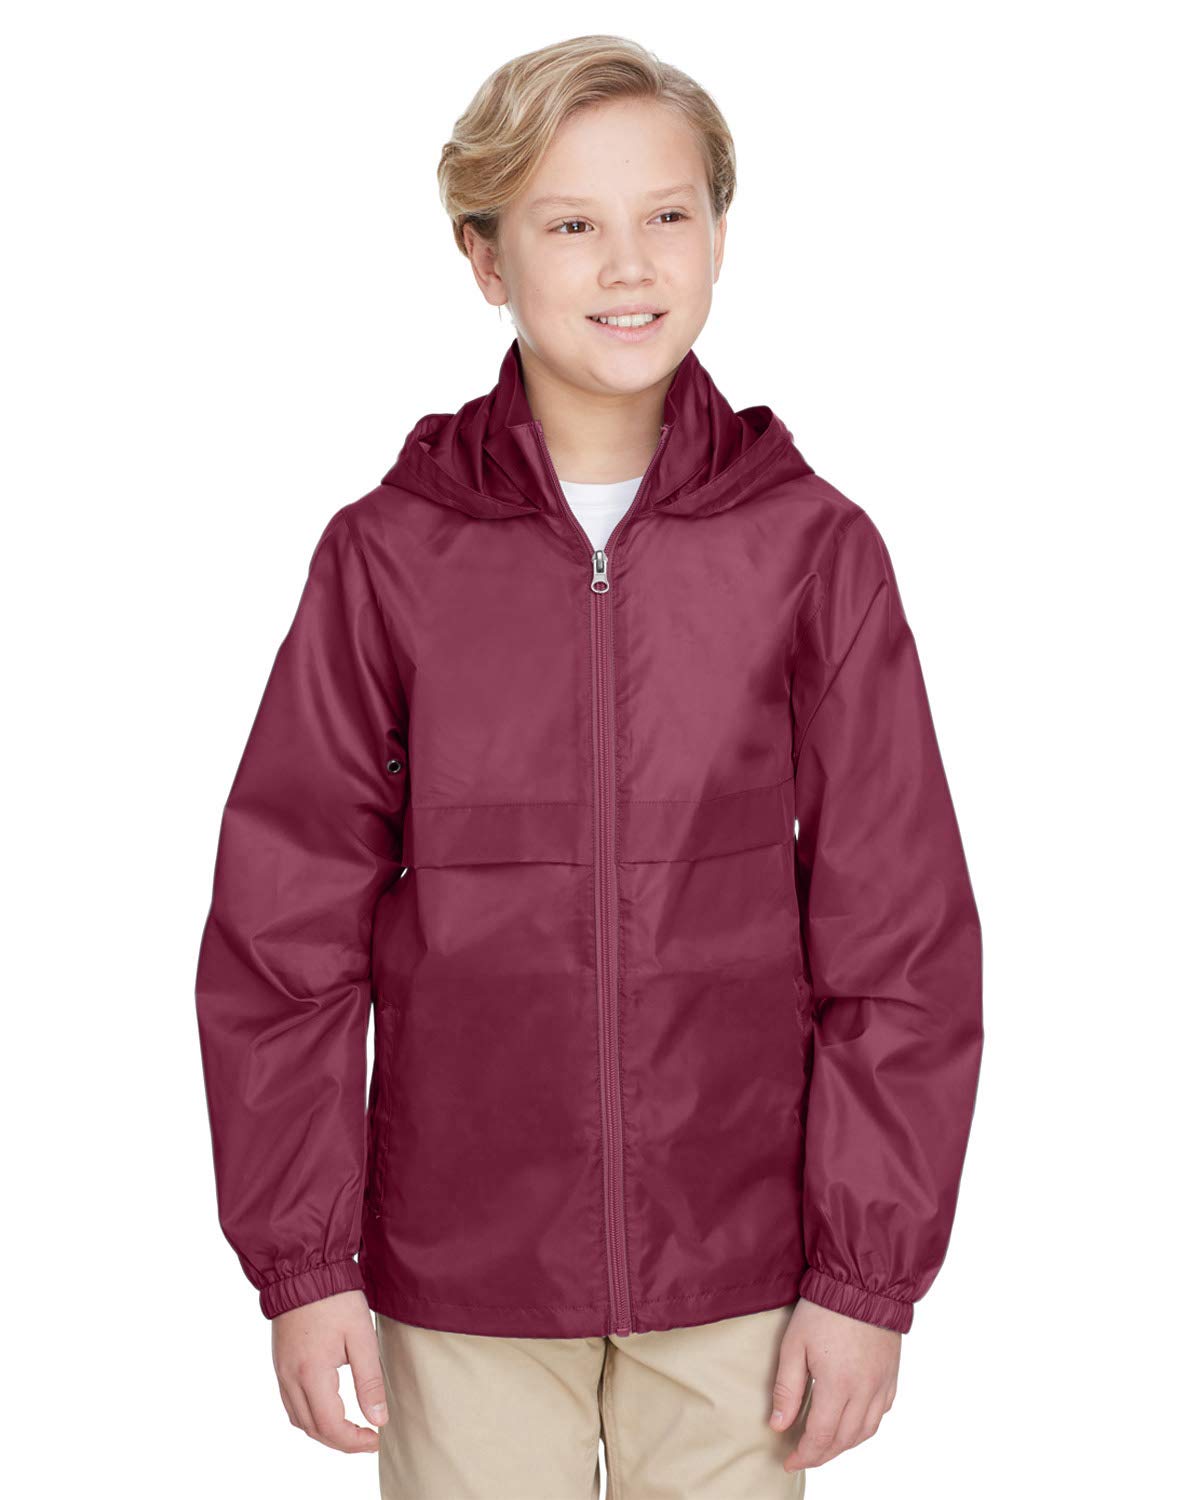 Team 365 Youth Zone Protect Lightweight Jacket M SPORT MAROON